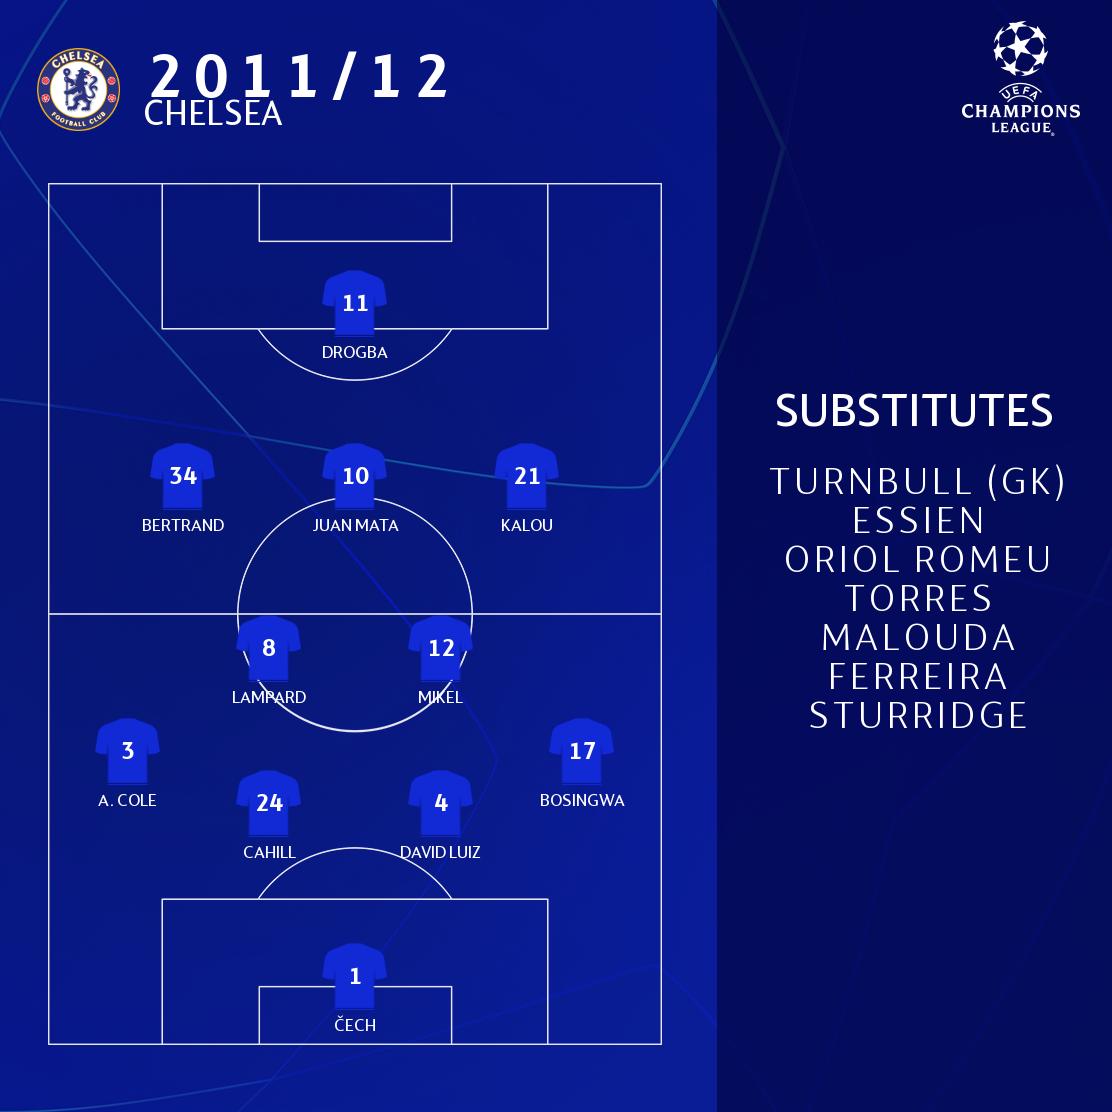 Uefa Champions League Chelsea S 12 Uclfinal Line Up Your Favourite Players From This Team Ucl Flashbackfriday